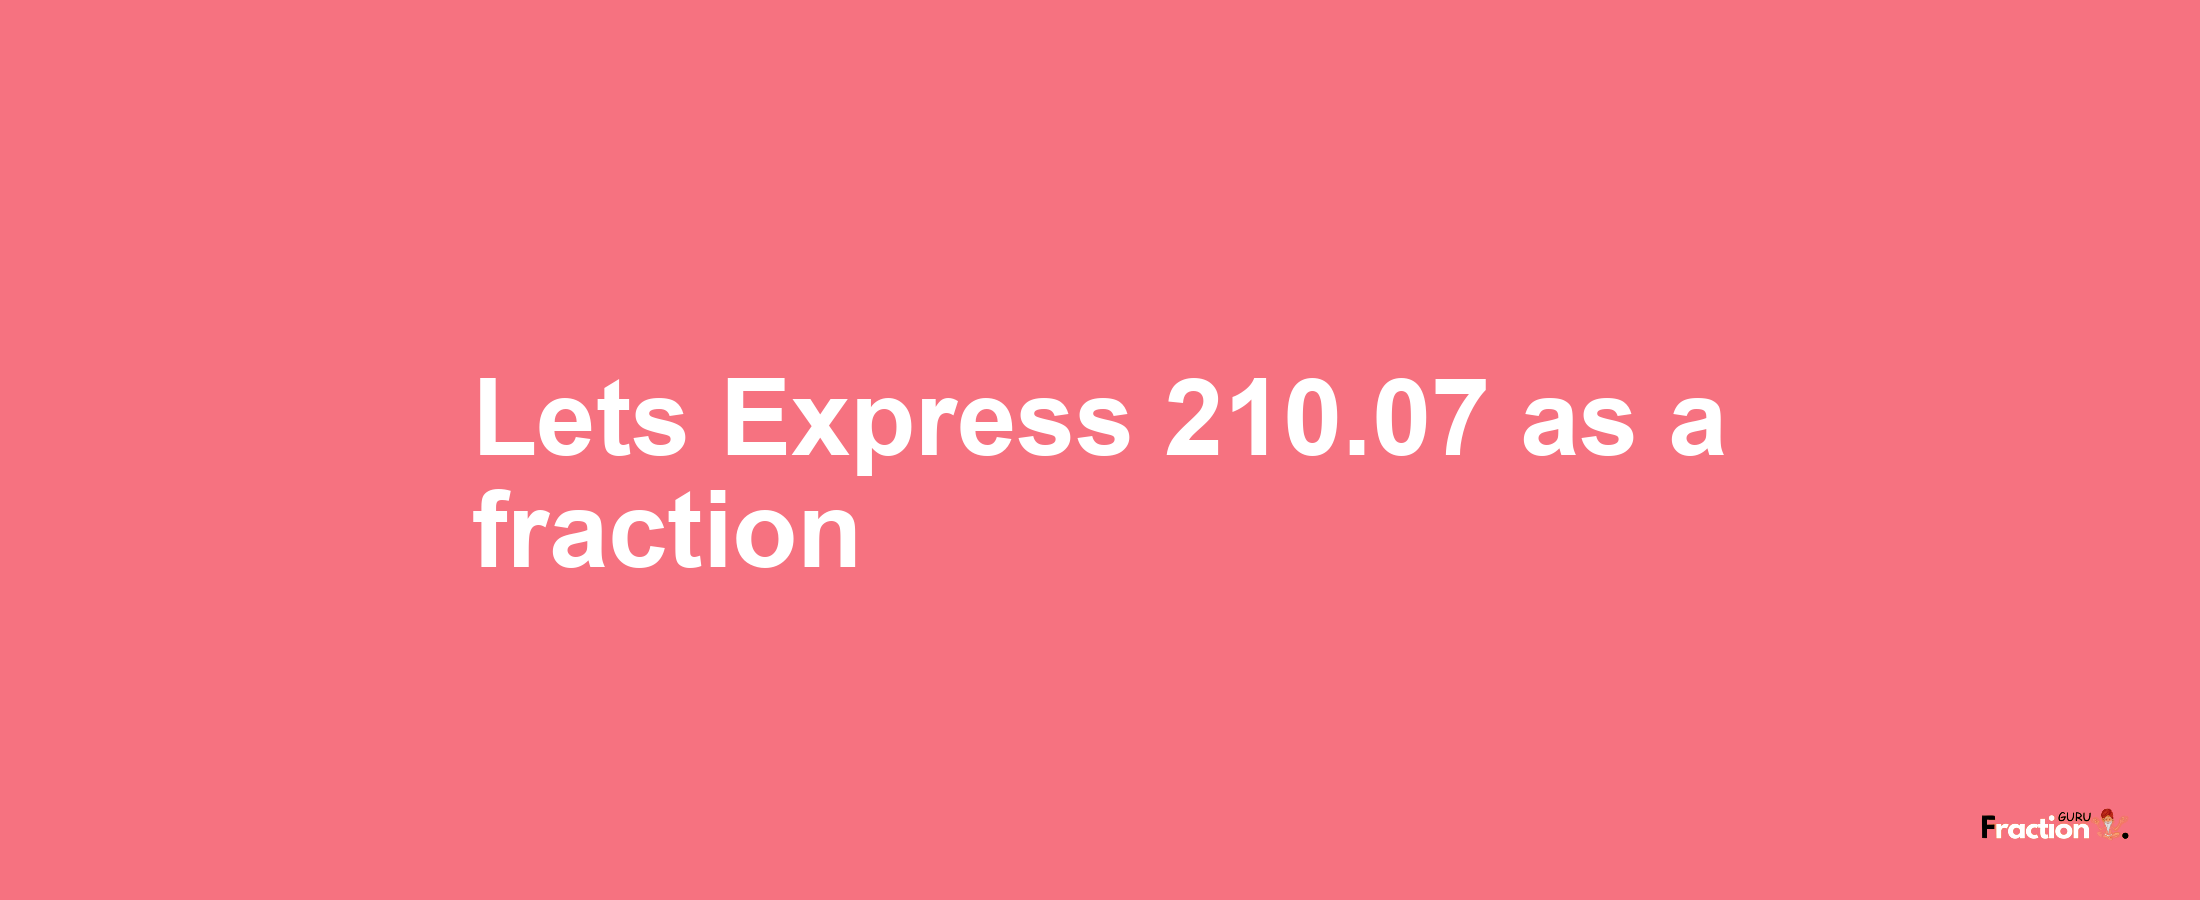 Lets Express 210.07 as afraction